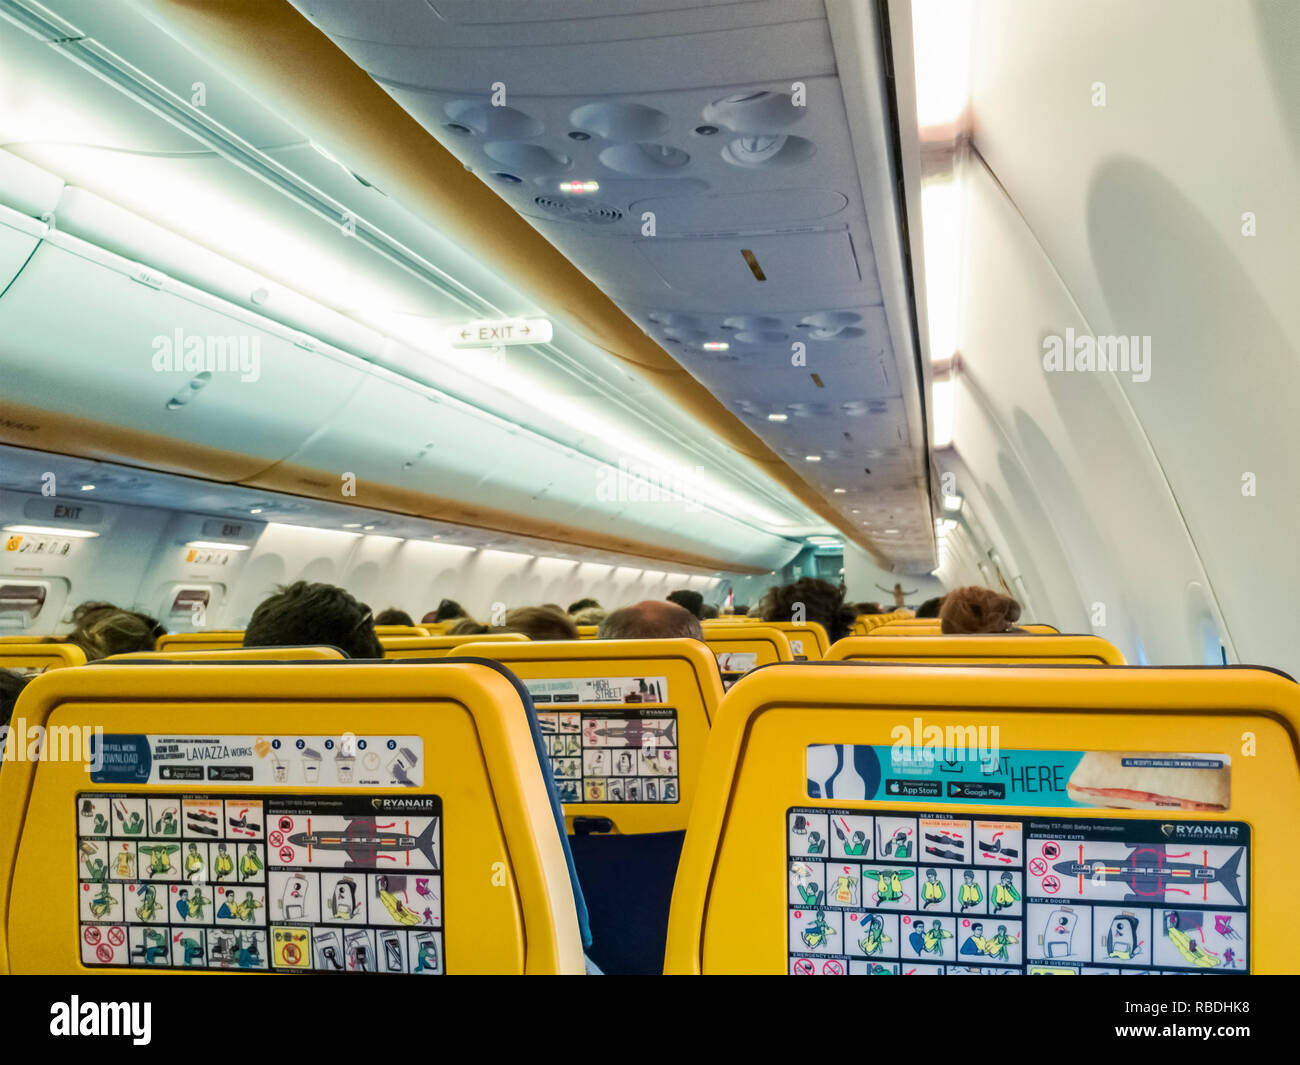 Ryanair Aircraft Seats View With Passengers Rear View Of